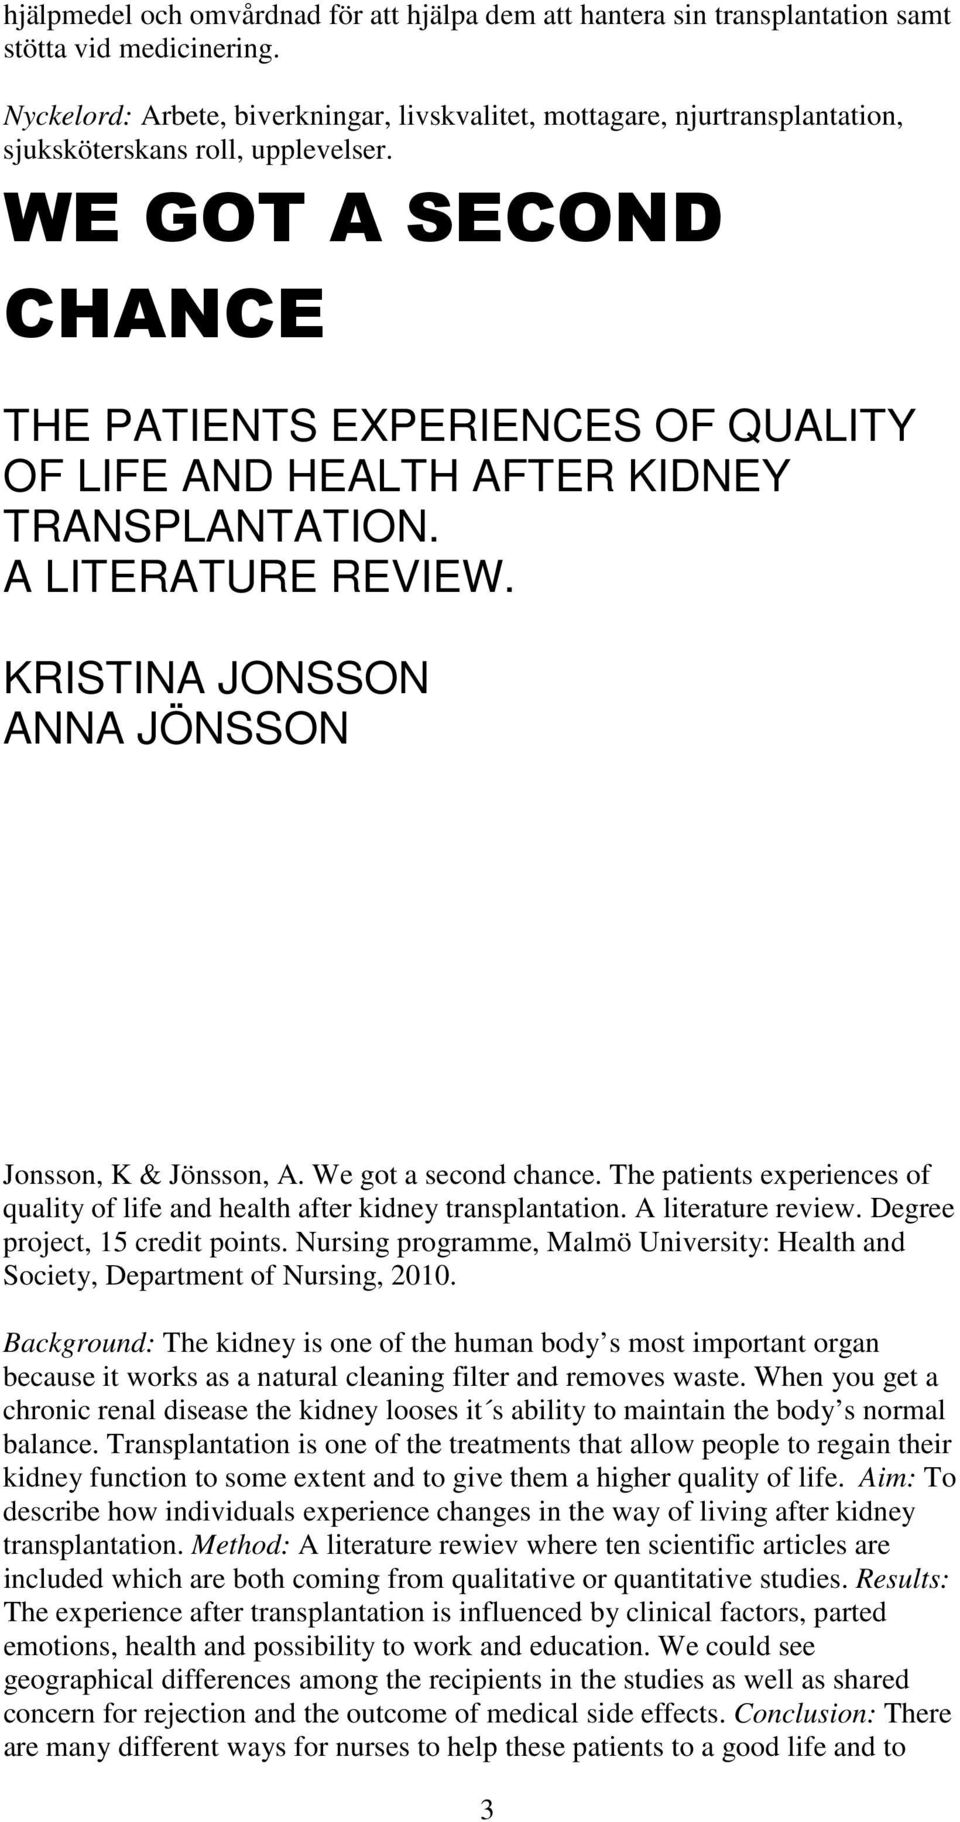 WE GOT A SECOND CHANCE THE PATIENTS EXPERIENCES OF QUALITY OF LIFE AND HEALTH AFTER KIDNEY TRANSPLANTATION. A LITERATURE REVIEW. KRISTINA JONSSON ANNA JÖNSSON Jonsson, K & Jönsson, A.